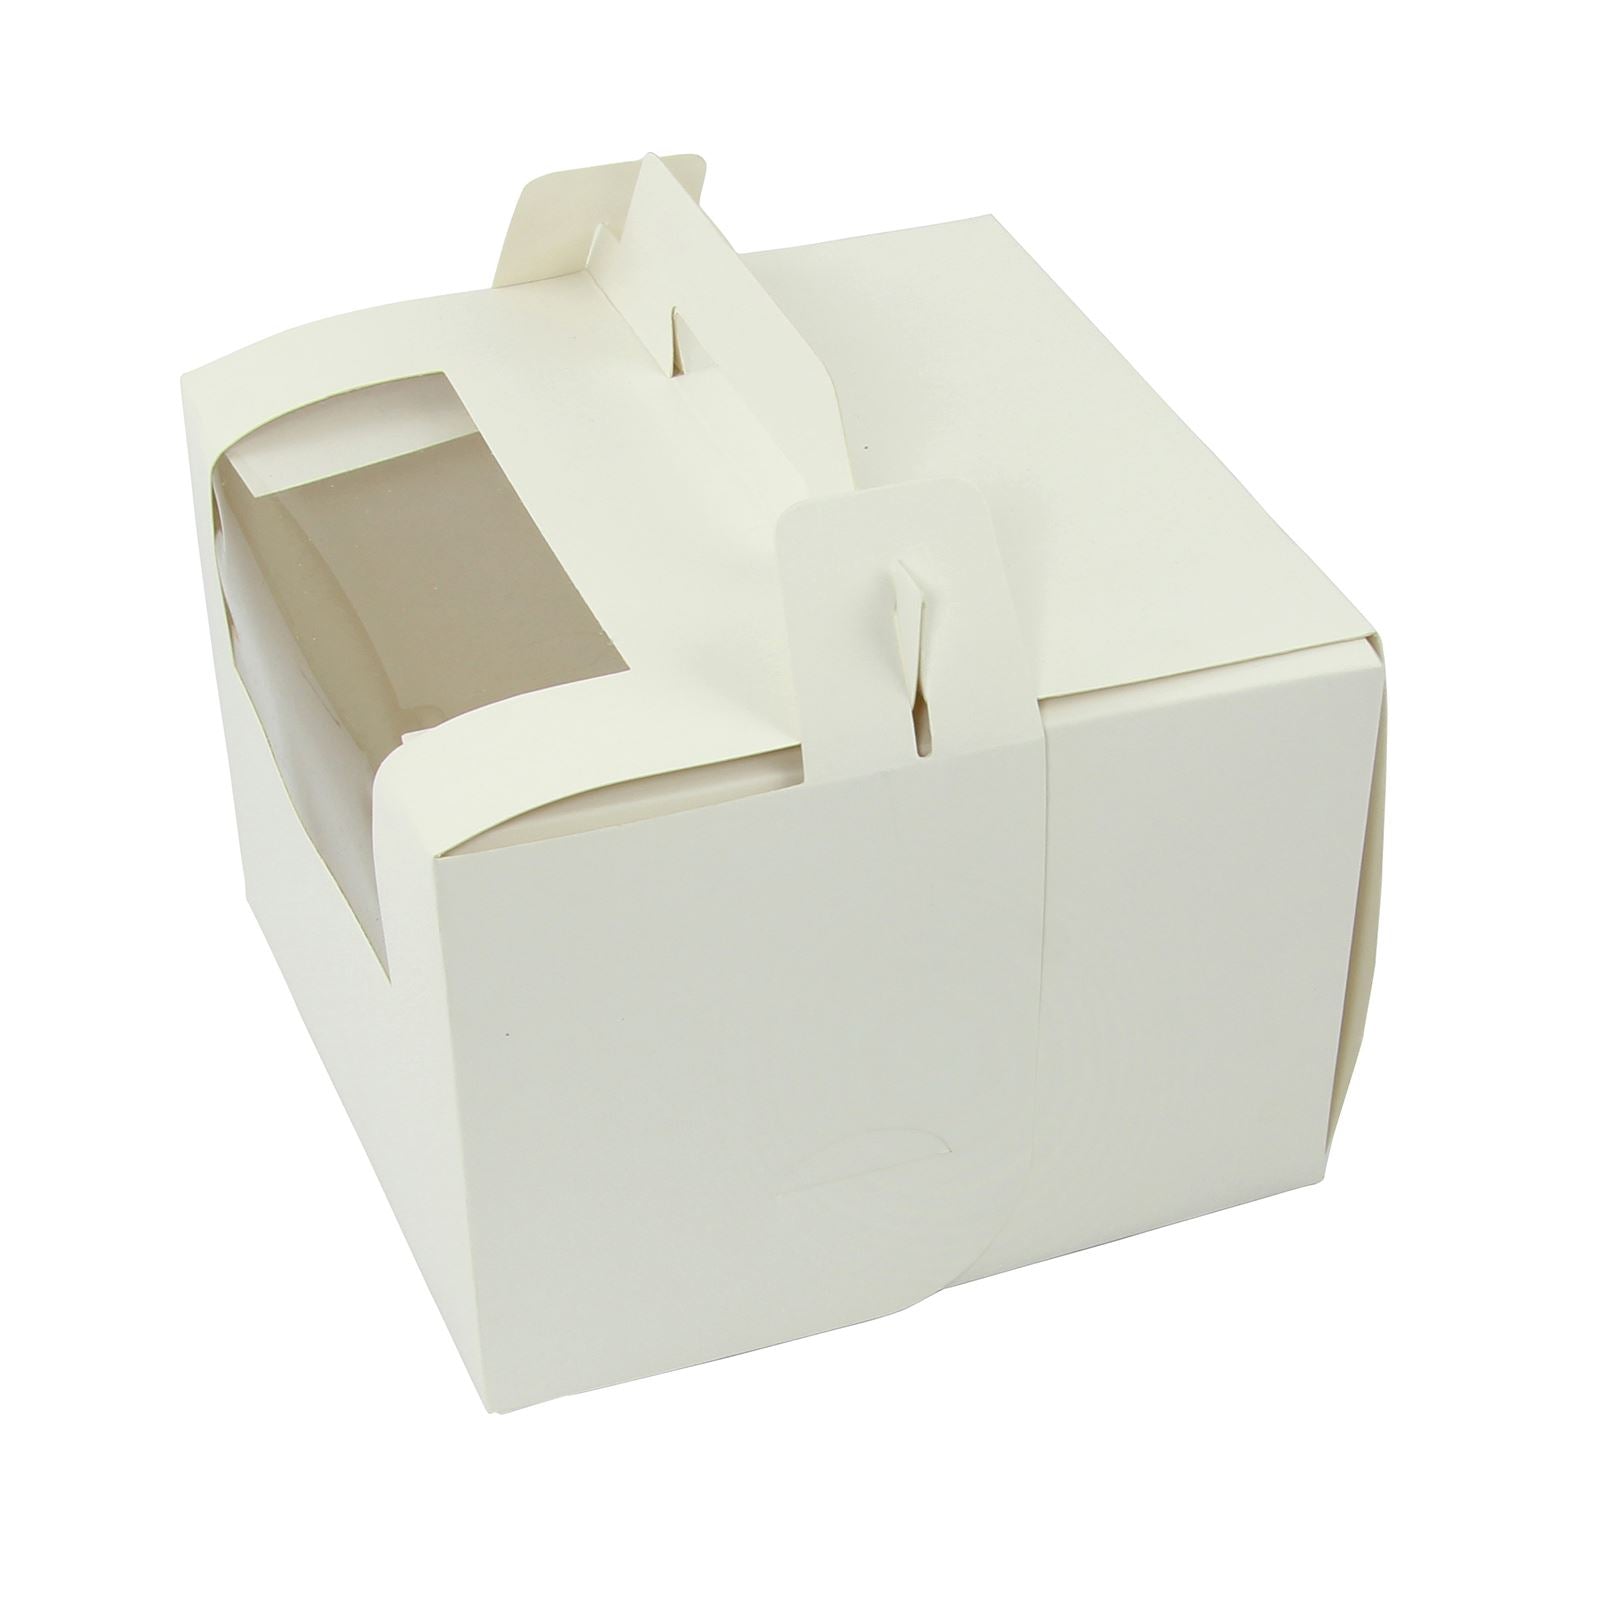 8 Inch Cake Box with Handle